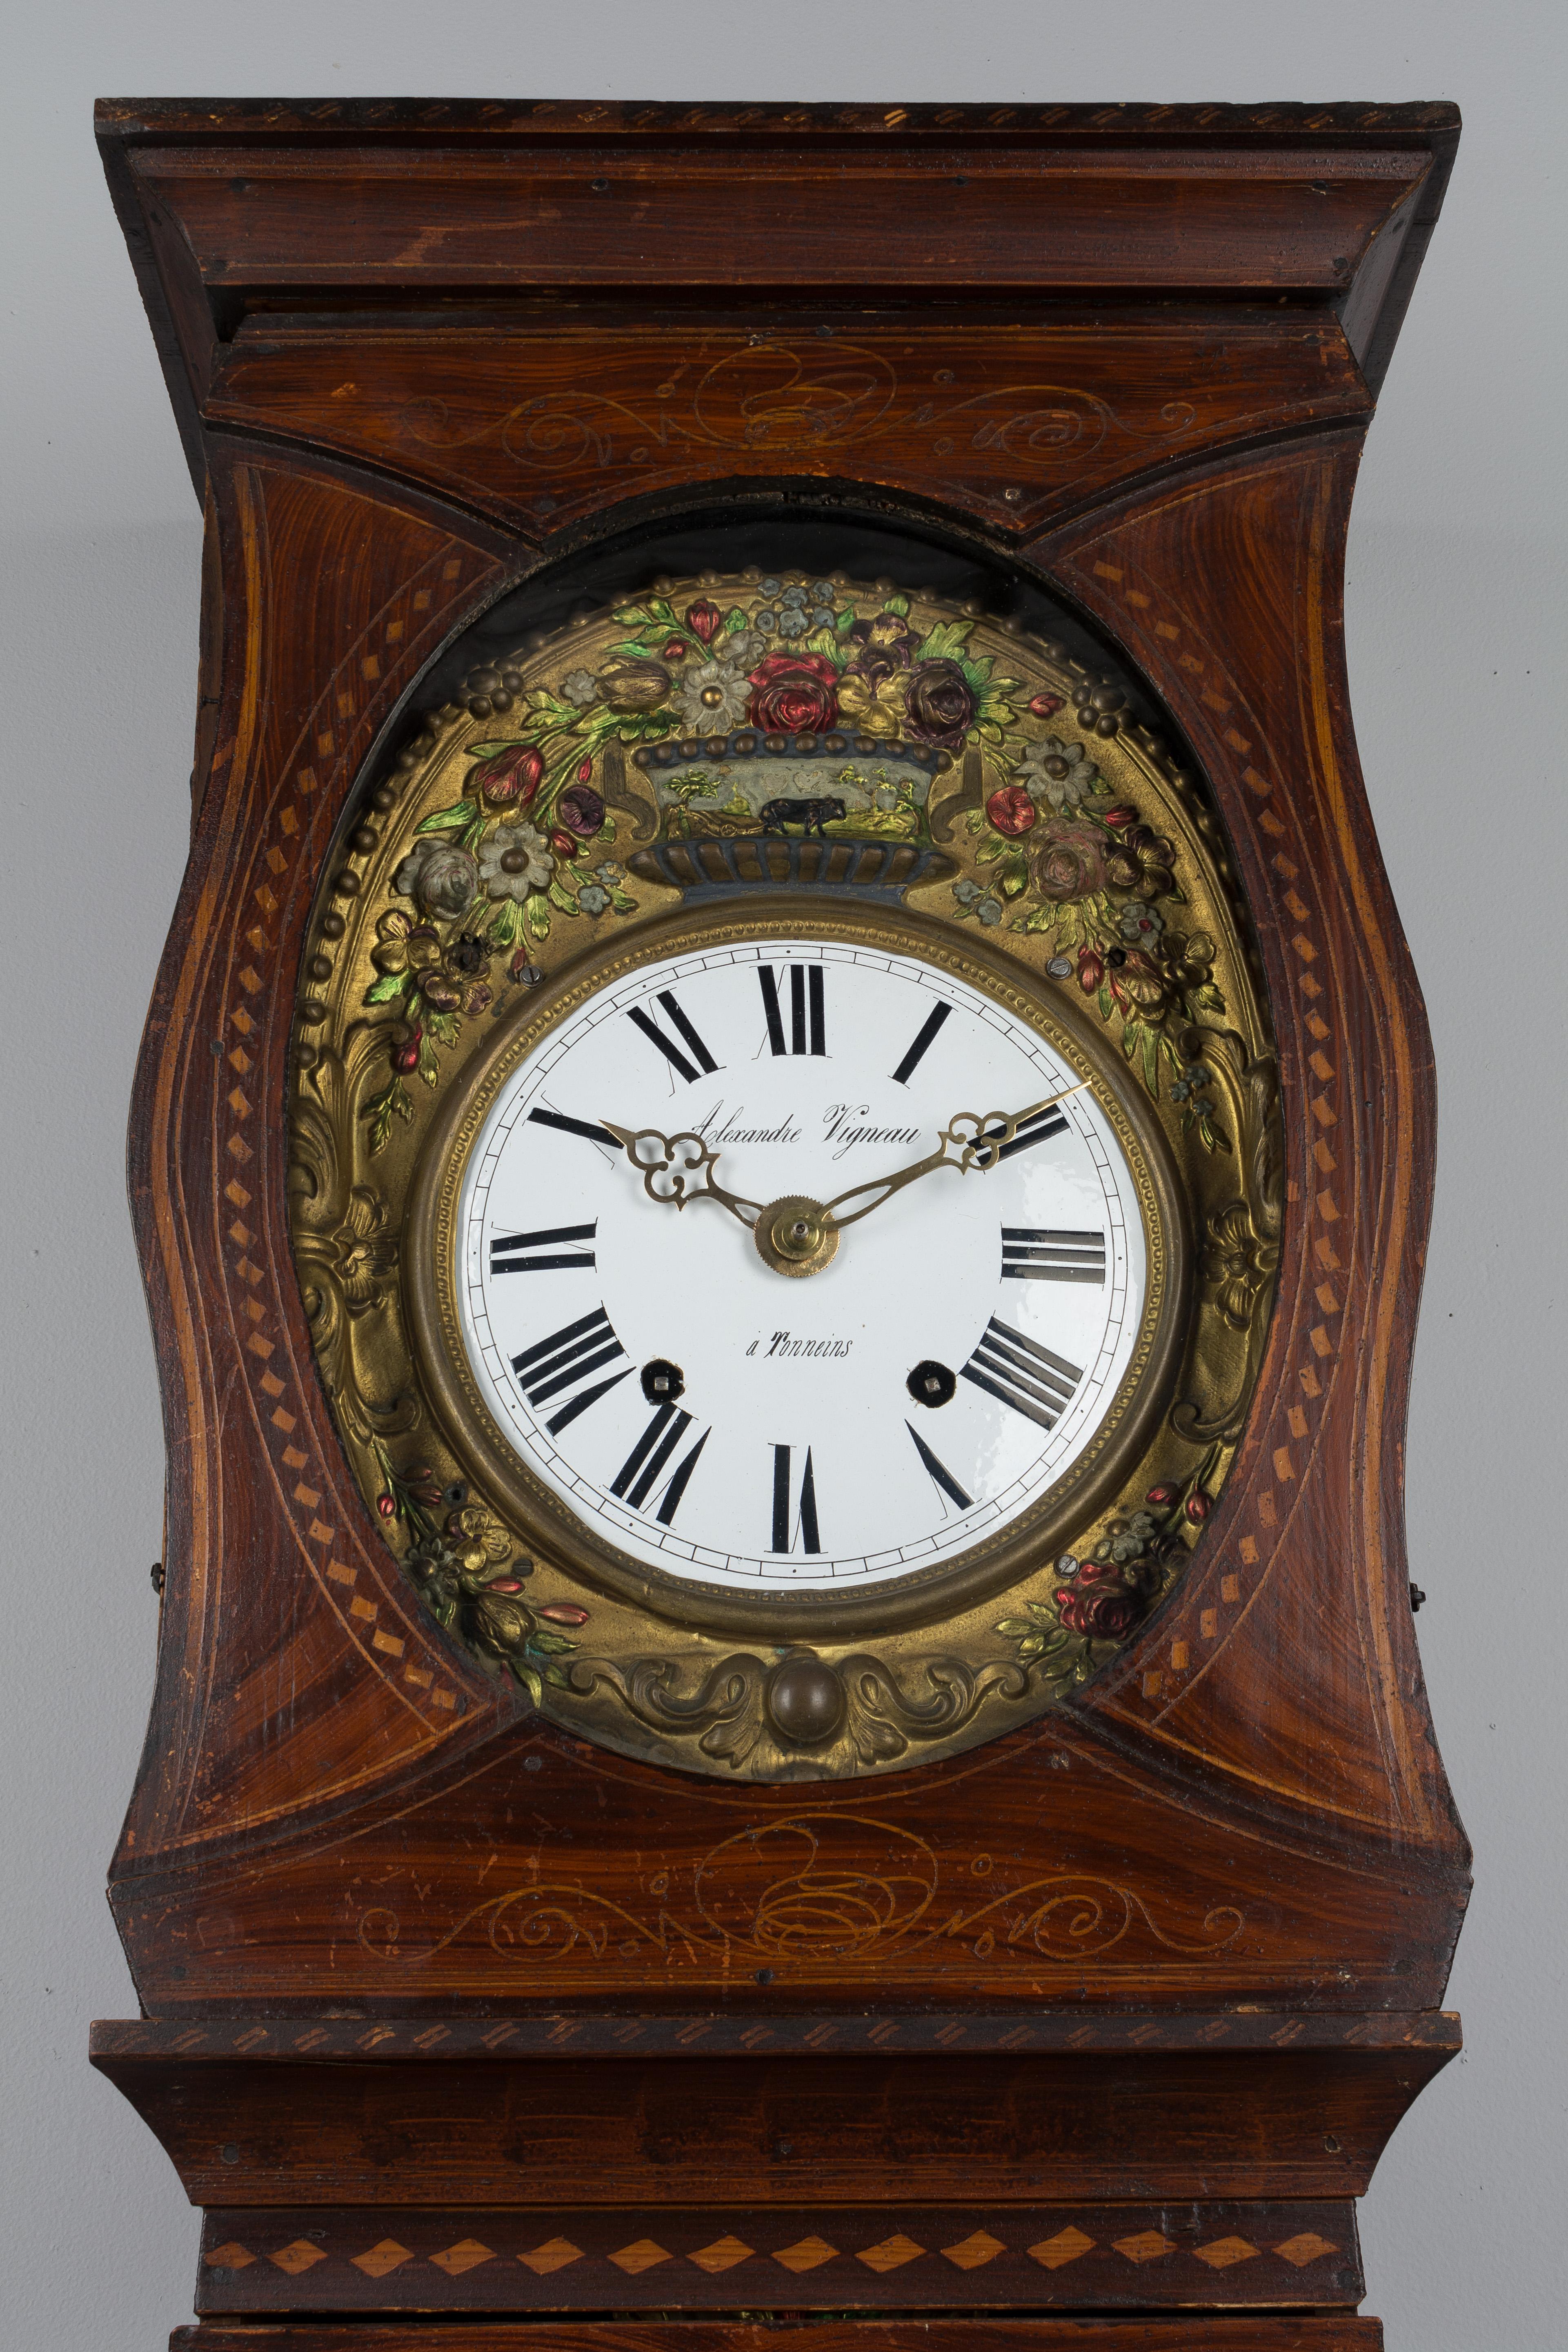 A good French country comtoise or grandfather clock with polychrome painted pine case and embossed pendulum. Original seven day Morbier movement, cleaned and in working order, having an enamel face, signed by the clockmaker, Alexandre Vigneau and